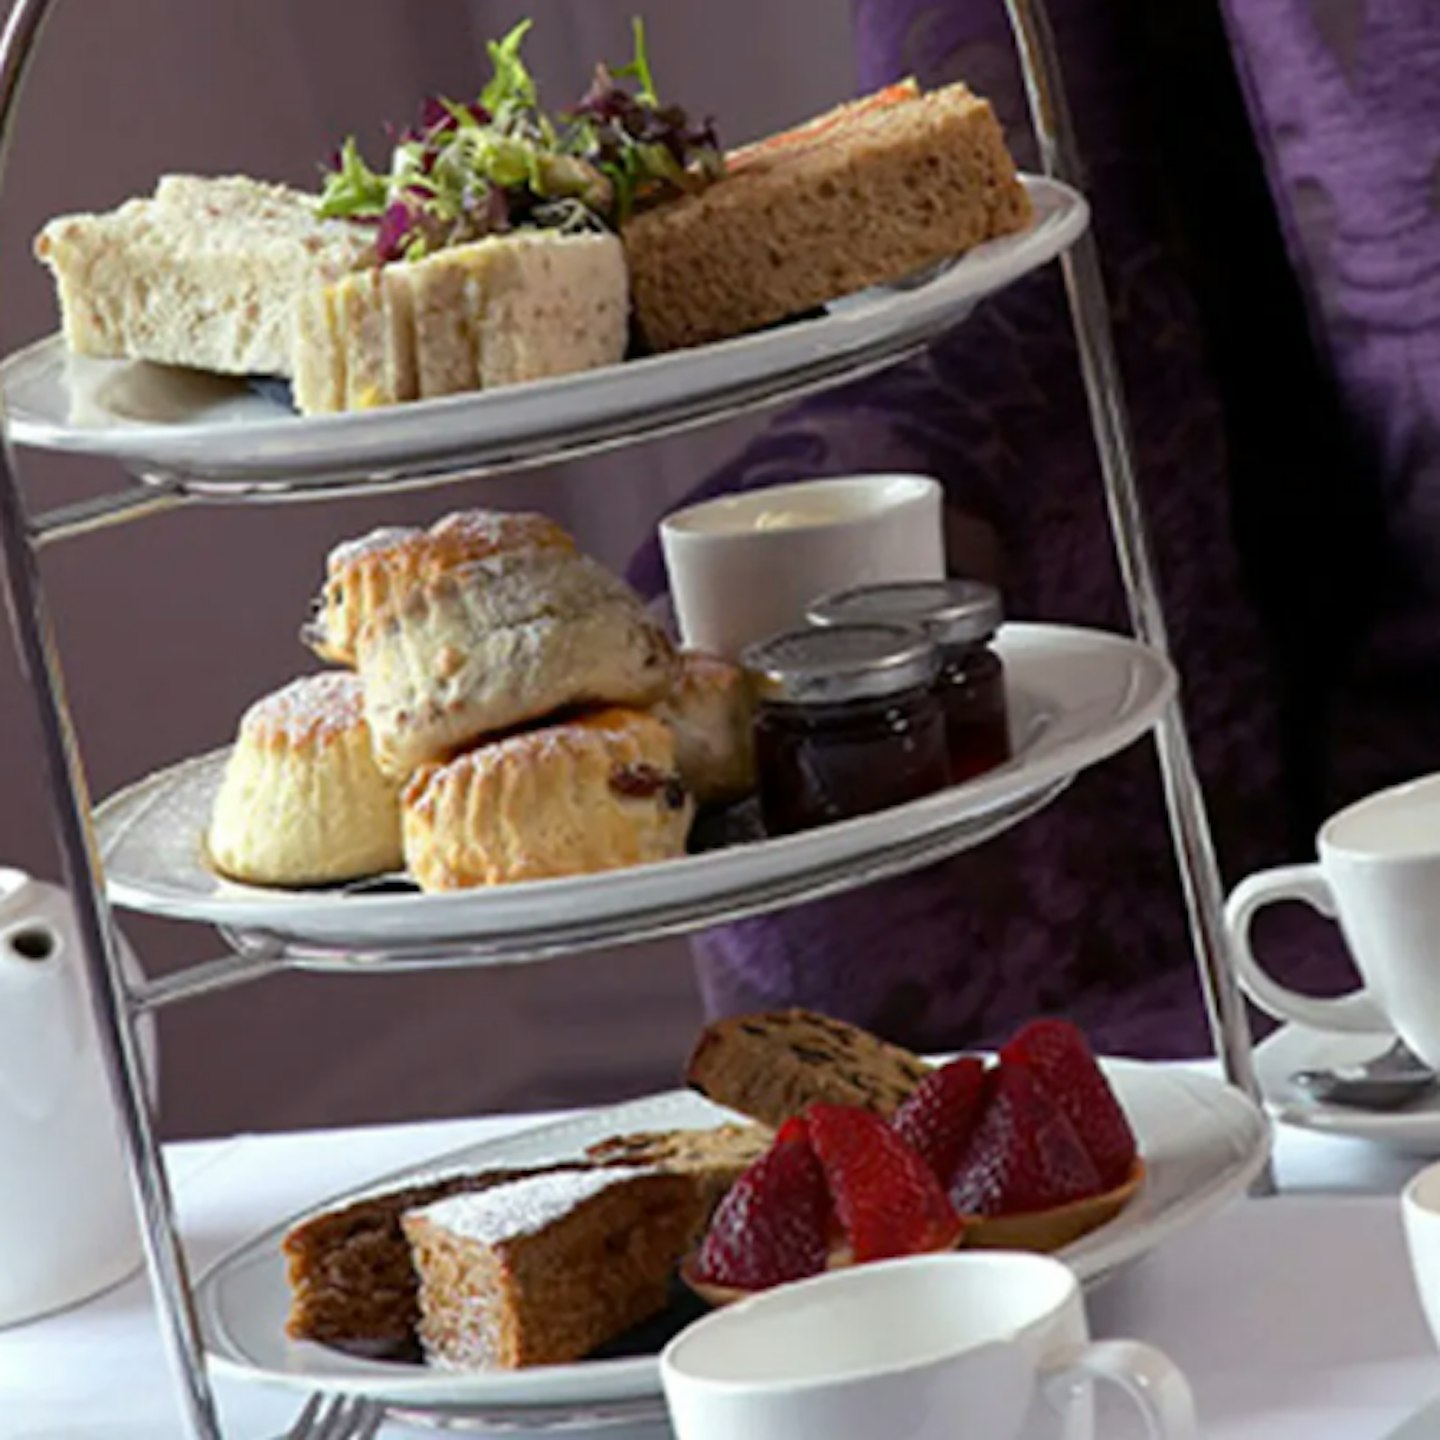 Visit to Windsor Castle and Afternoon Tea for Two